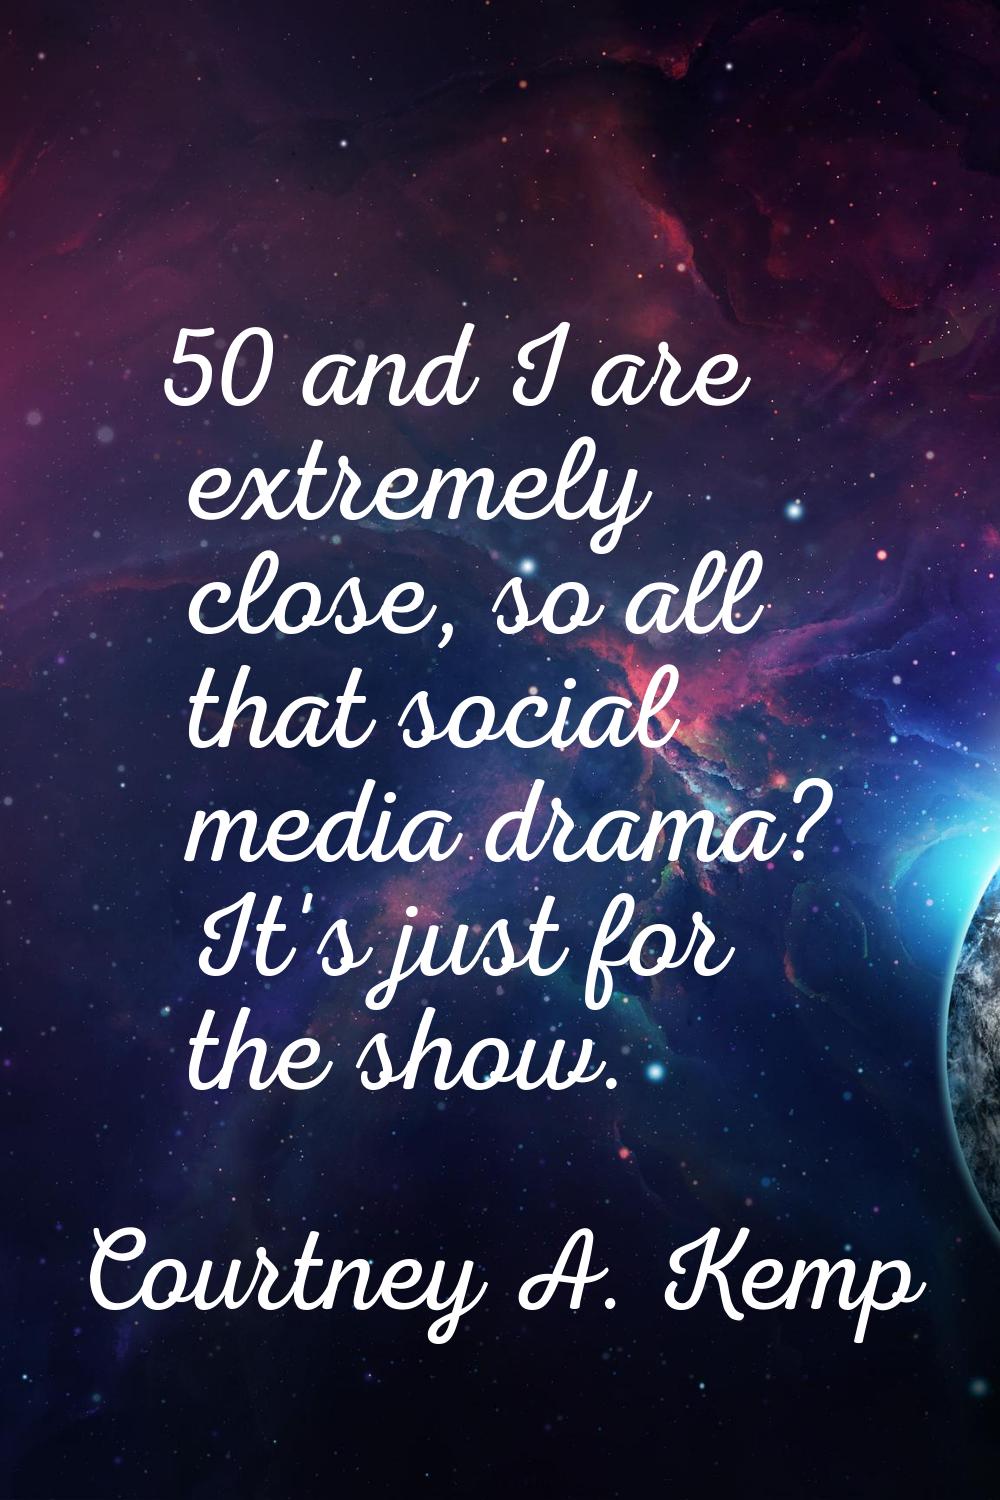 50 and I are extremely close, so all that social media drama? It's just for the show.